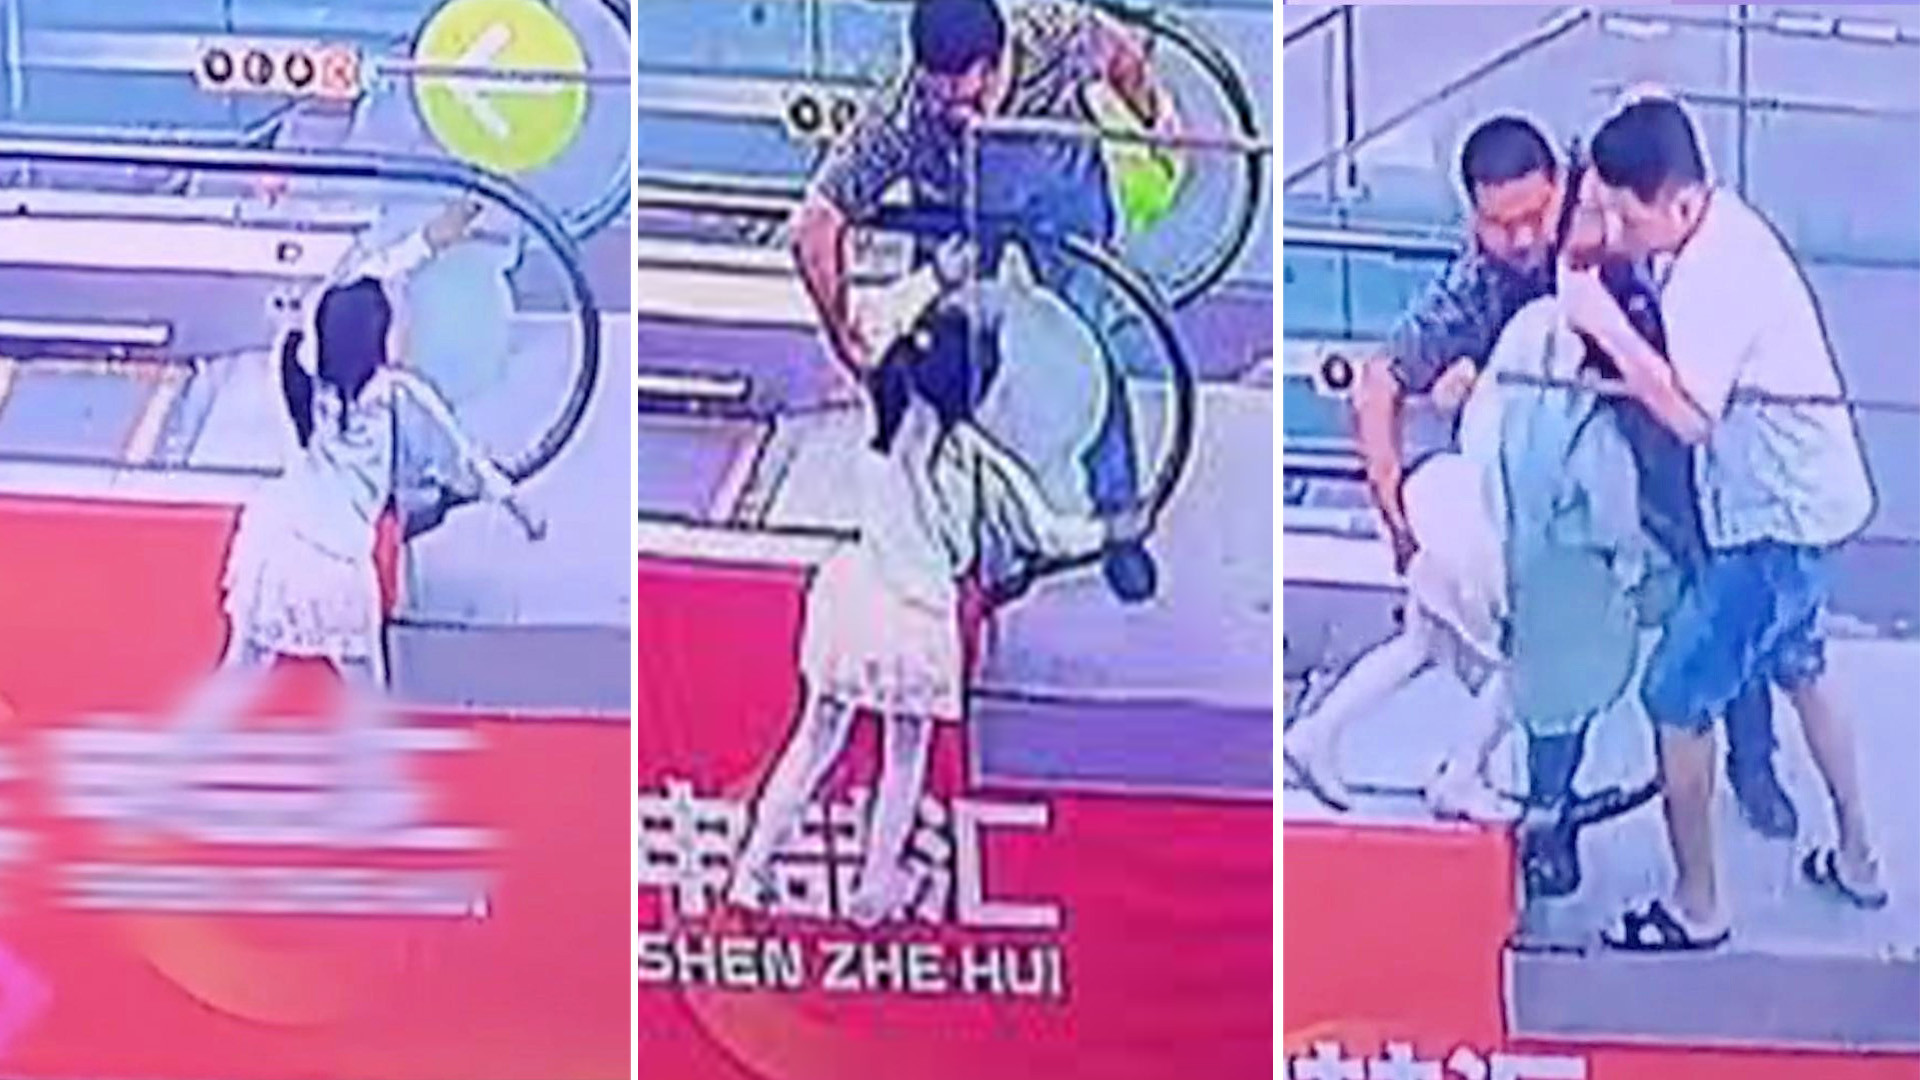 A man in China who rescued a girl about to fall off an escalator has been accused of inappropriately groping her by cyberbullies, but has been defended by members of the public. Photo: SCMP composite